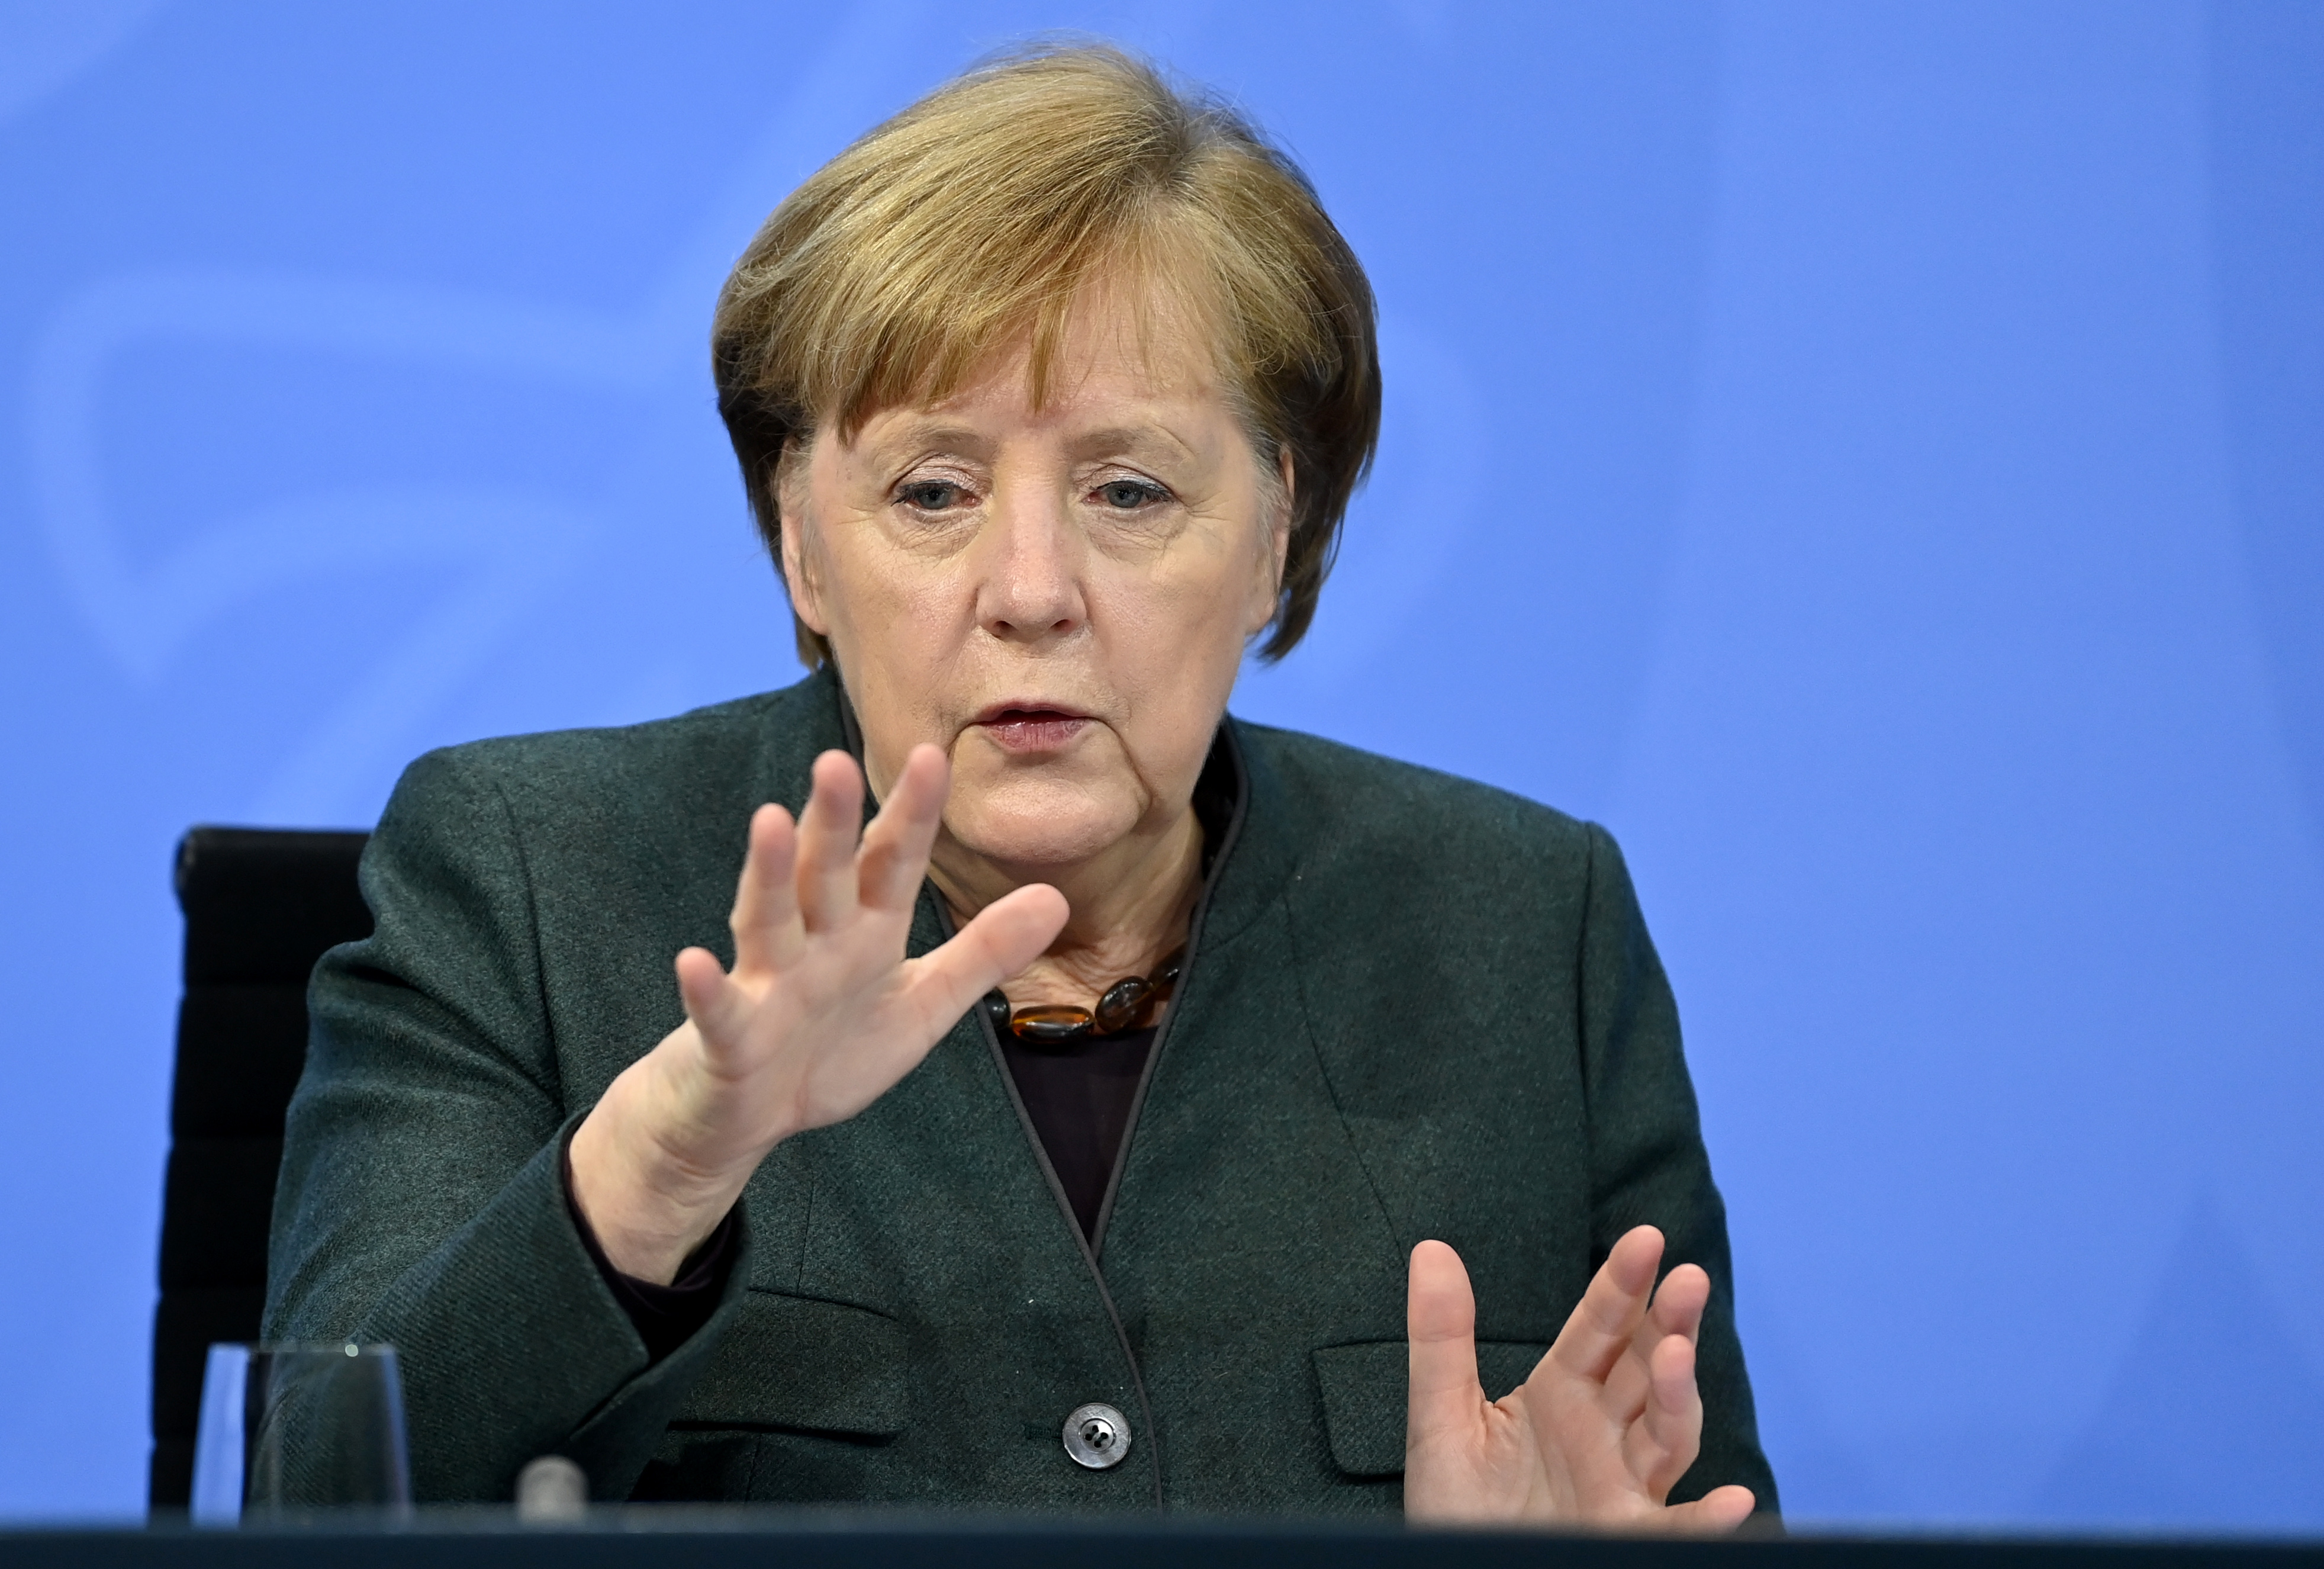 German Chancellor Angela Merkel speaks at a press conference following a video conference with the Prime Ministers of the federal states discussing new measures to bring down the numbers of Covid-19 infections on January 19.